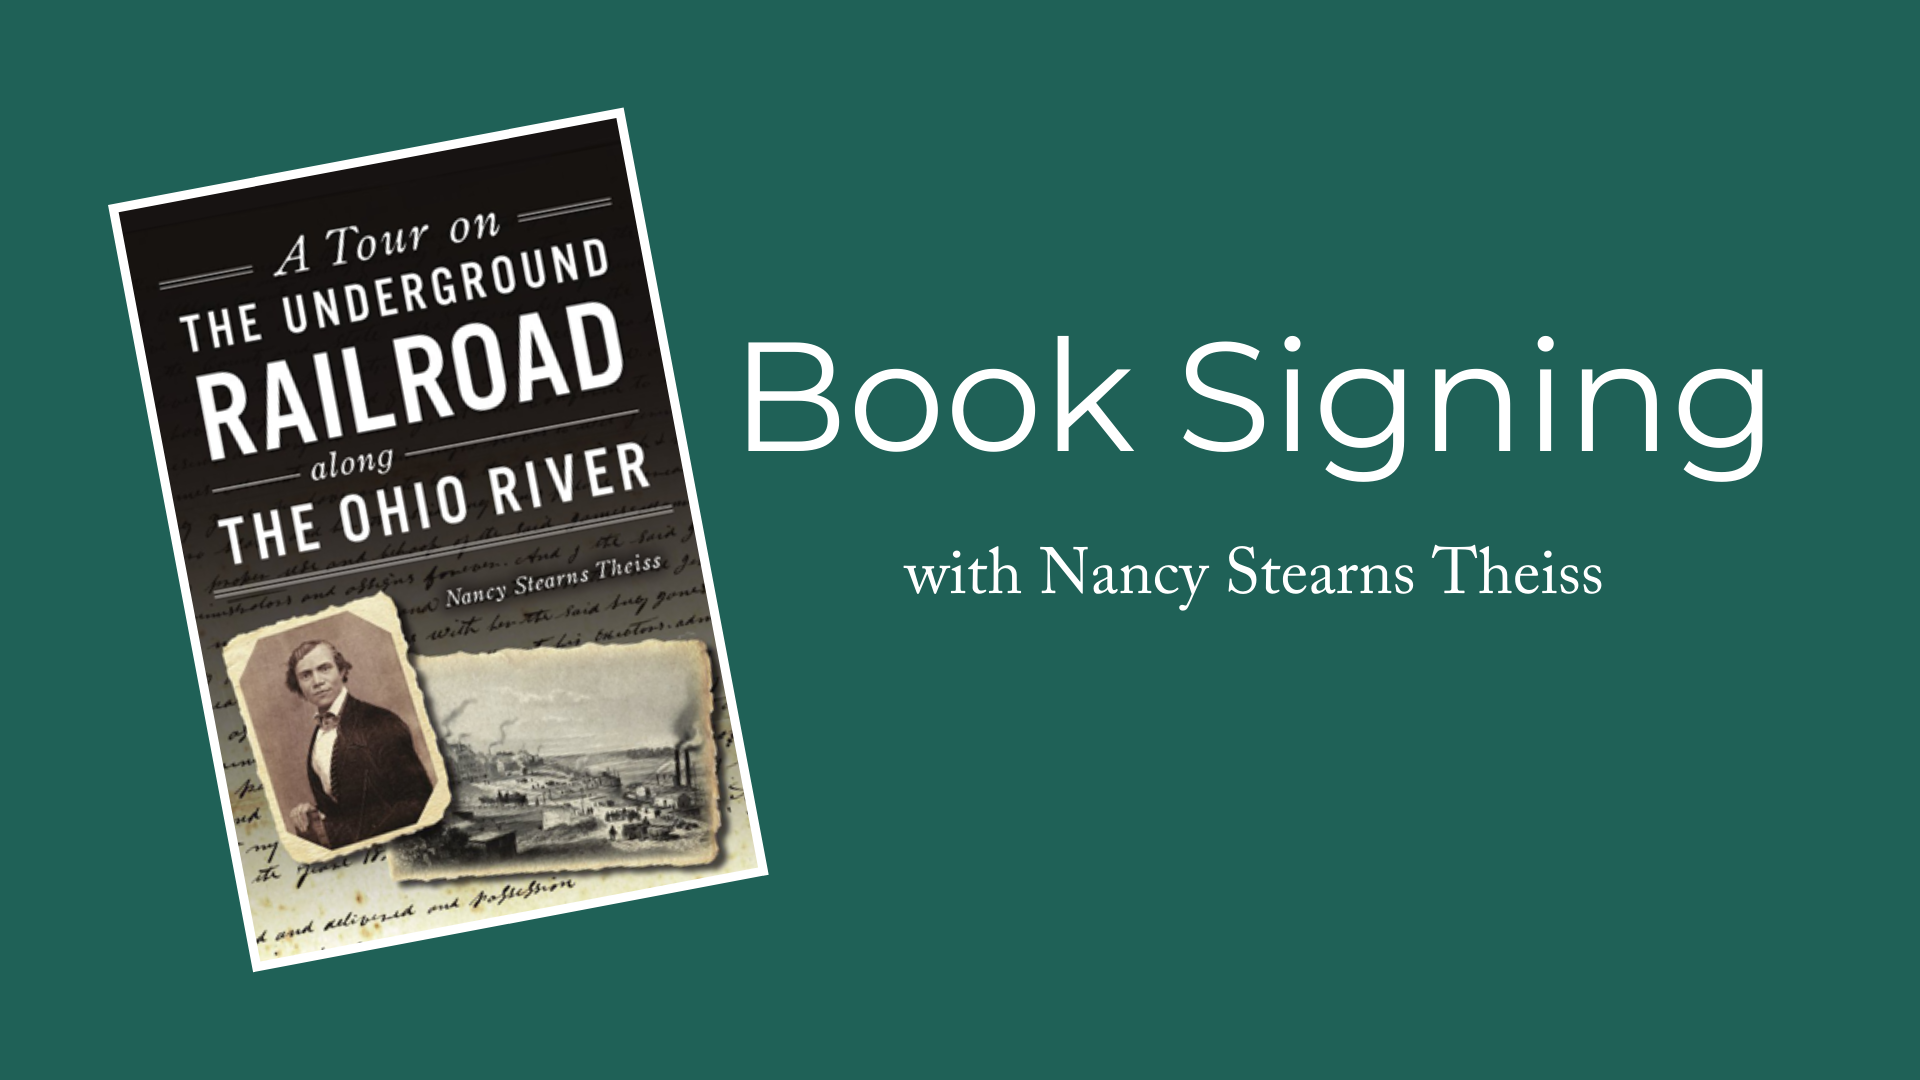 Book Signing with Nancy Stearns Theiss